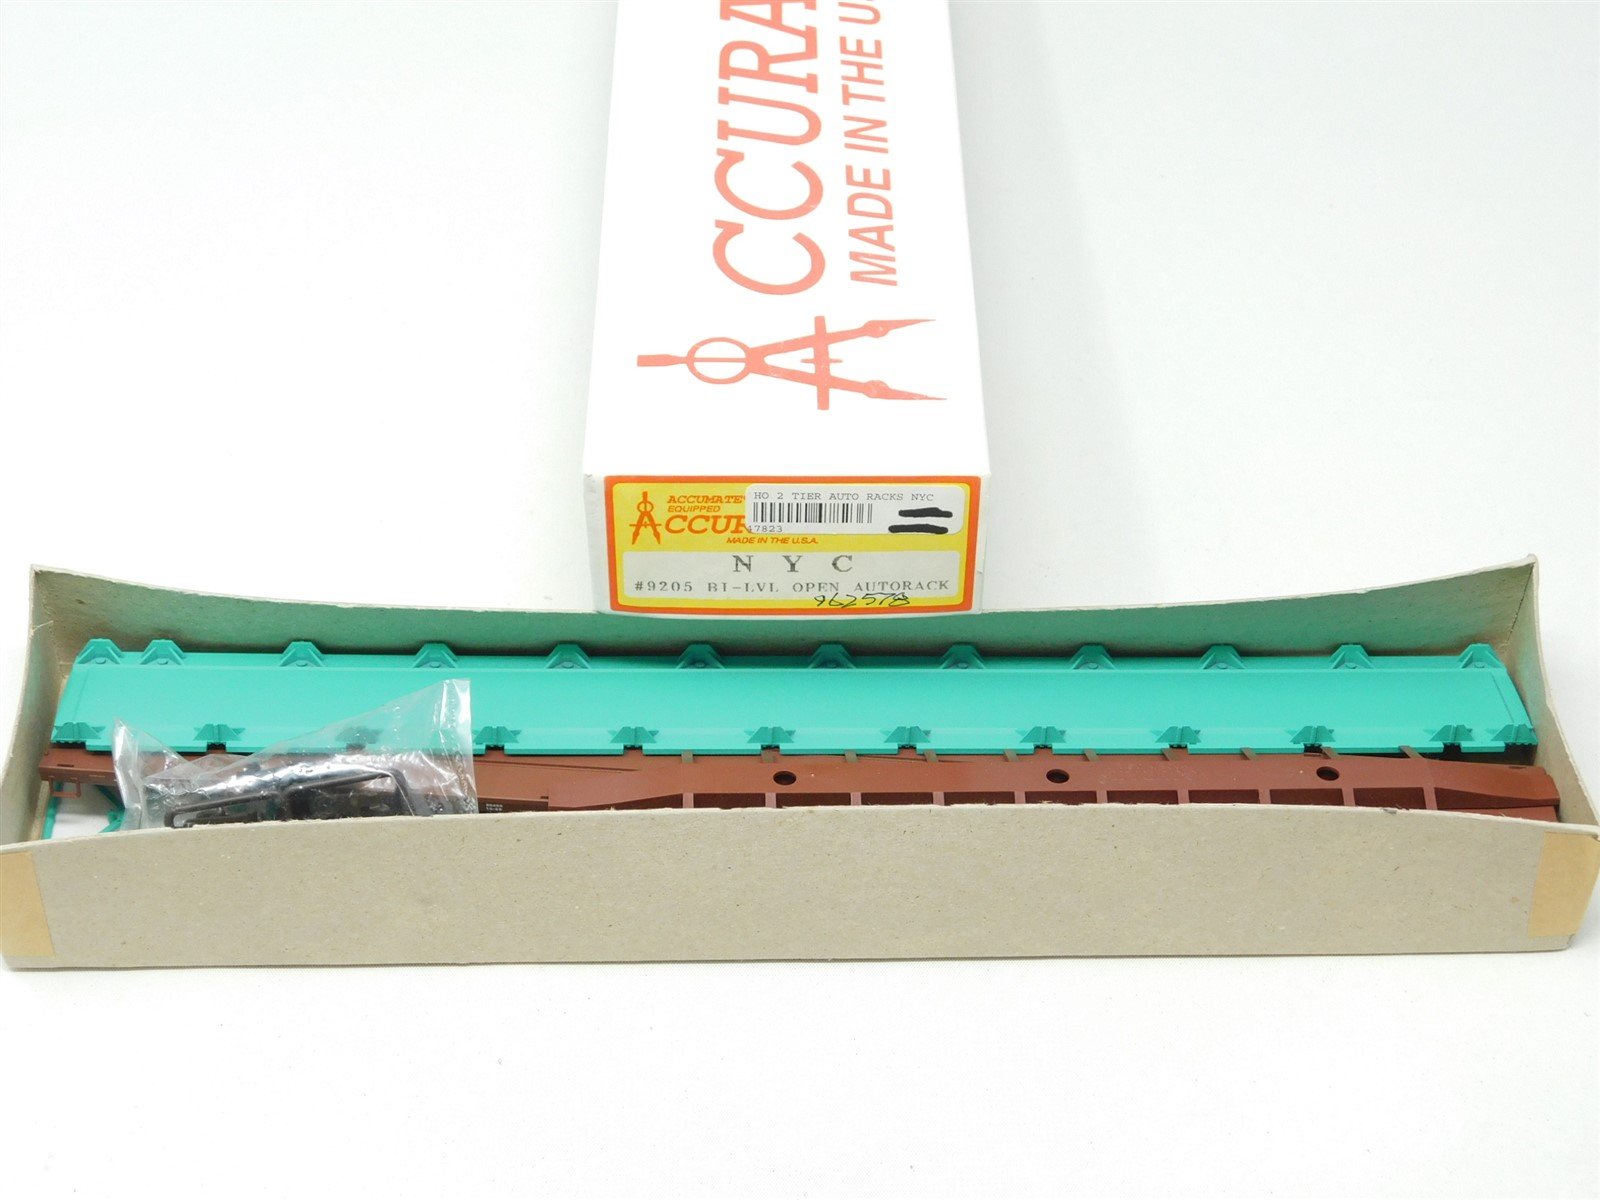 HO Scale Accurail Kit 9205 NYC New York Central Bi-Level Auto Rack Car #962578